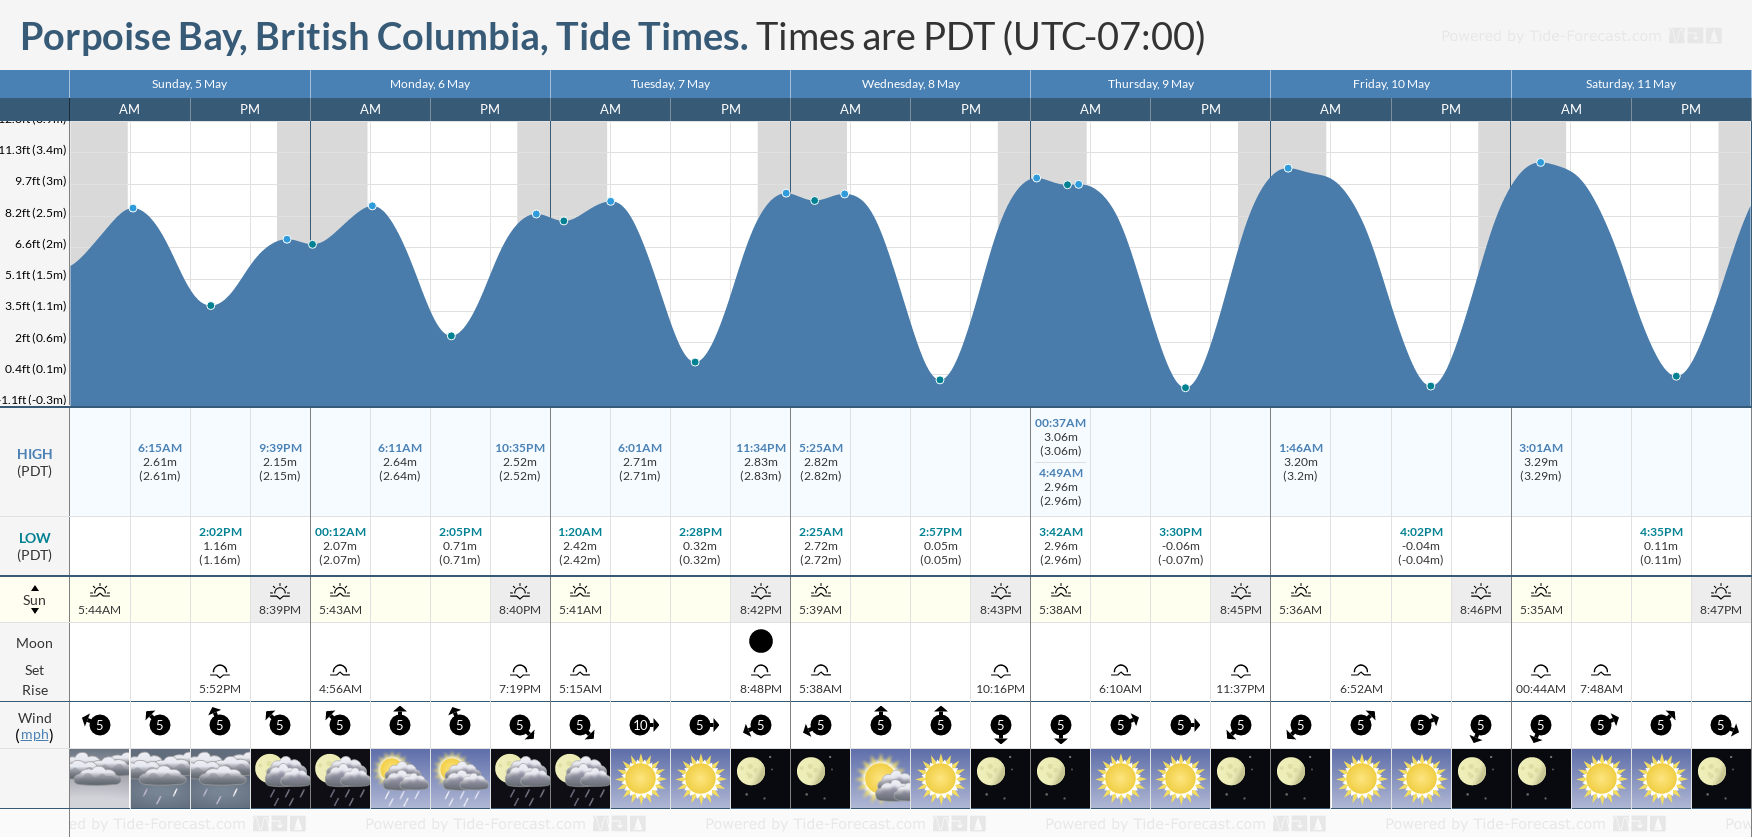 Porpoise Bay, British Columbia Tide Chart including high and low tide tide times for the next 7 days